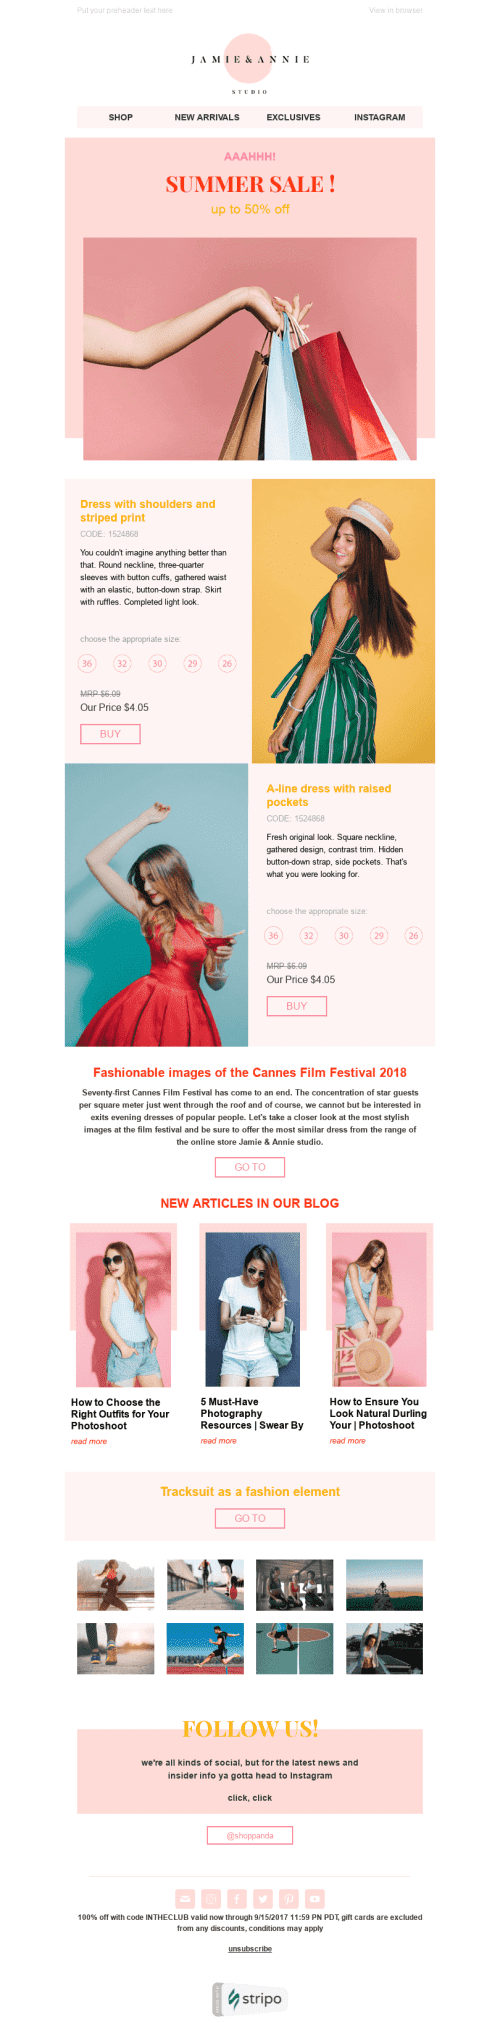 Summer Mood Email Template by Juli Zemlyana — Stripo.email